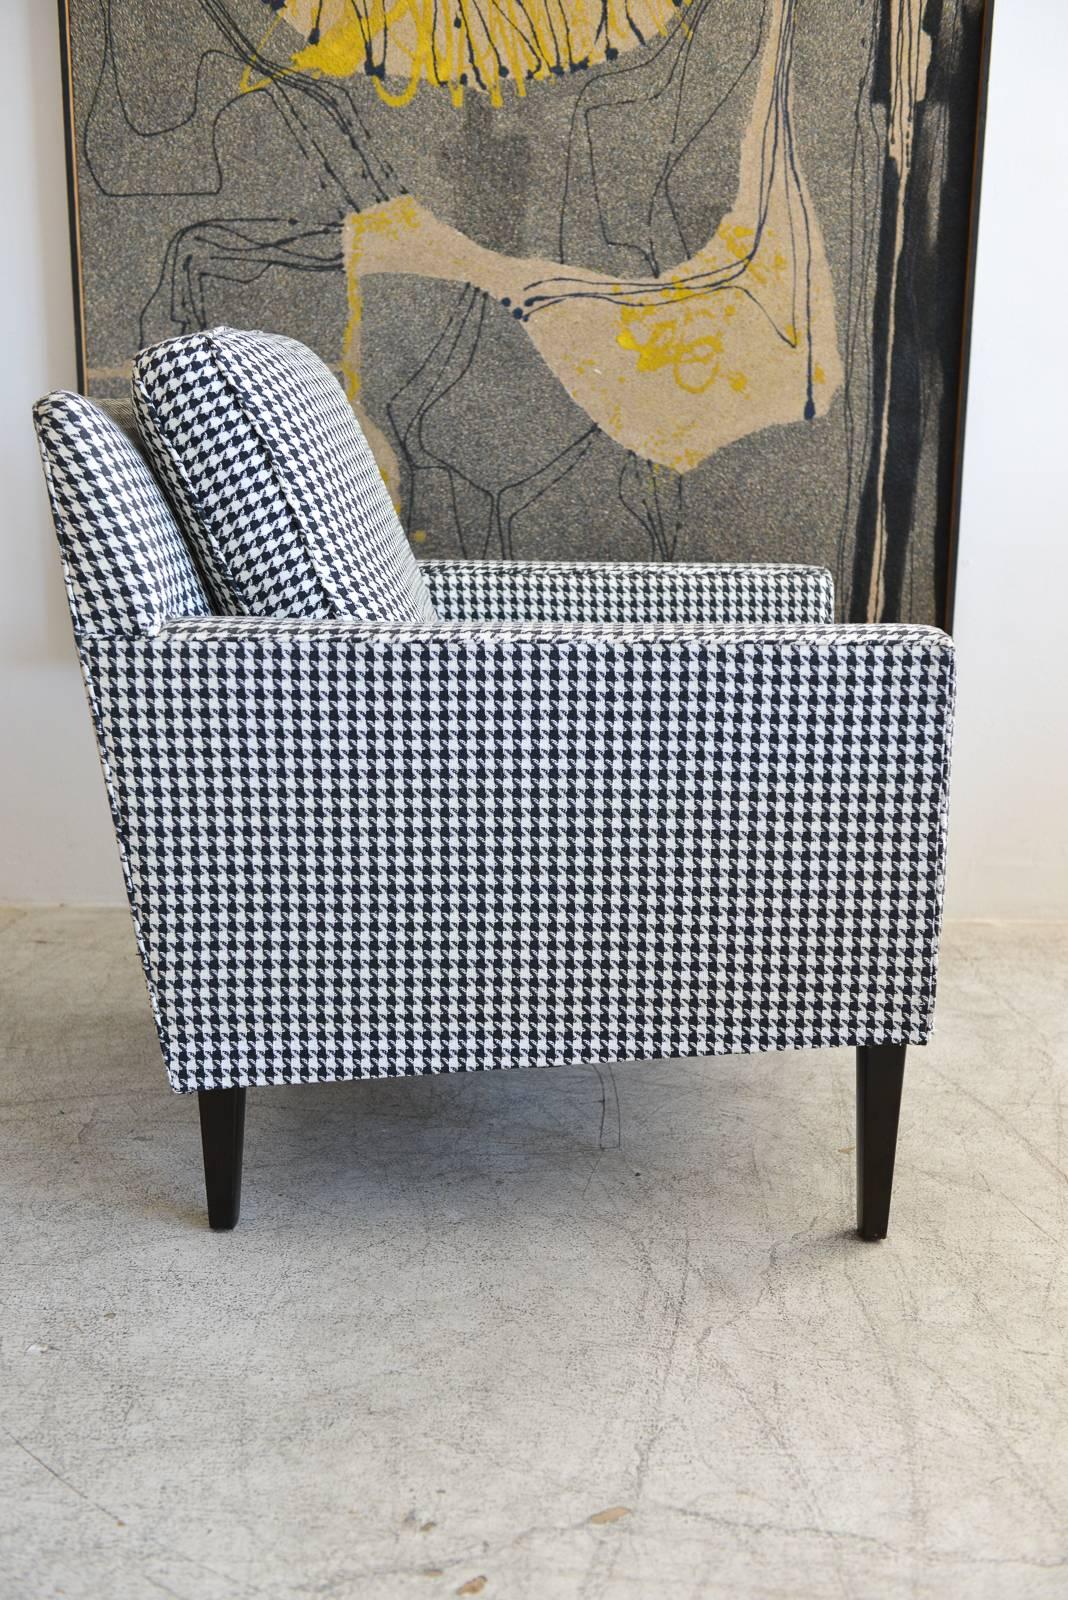 Houndstooth lounge chair by Edward Wormley for Dunbar, circa 1970. Original black and white houndstooth check fabric. Slight wear to one corner, otherwise very good.

Measures: 30.25 in.H x 28.5 in.W x 32 in.D.